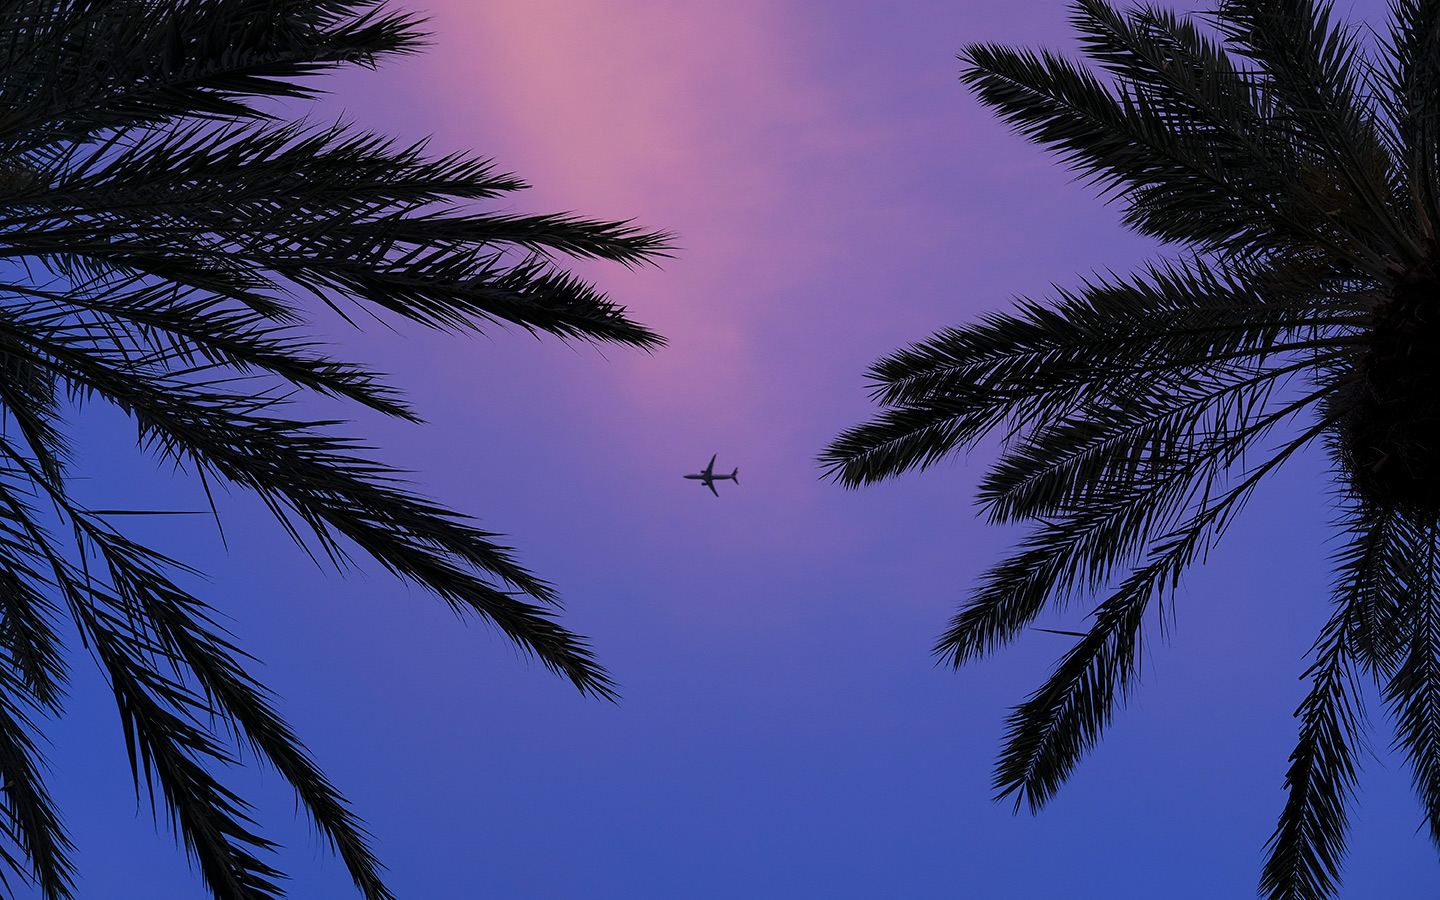 Airplane flying high between two palm trees